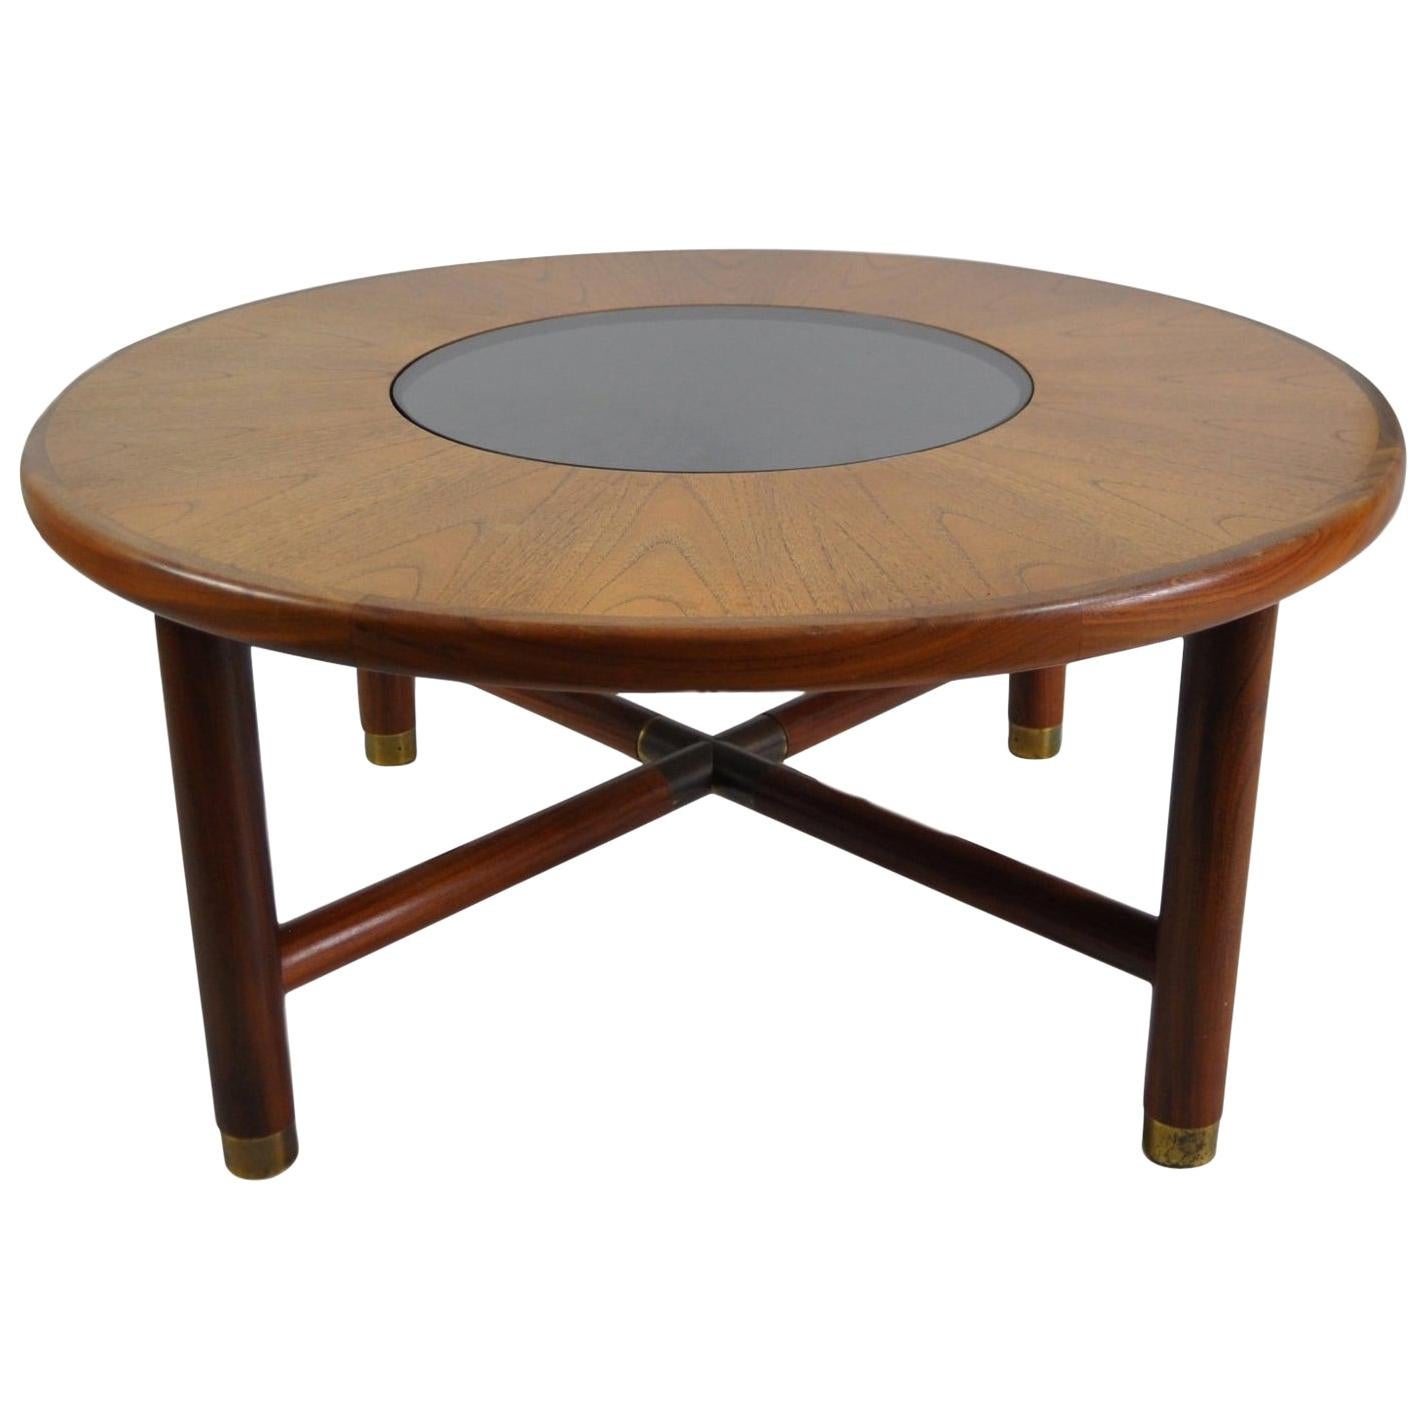 G-Plan Midcentury Round Teak and Glass Coffee Table